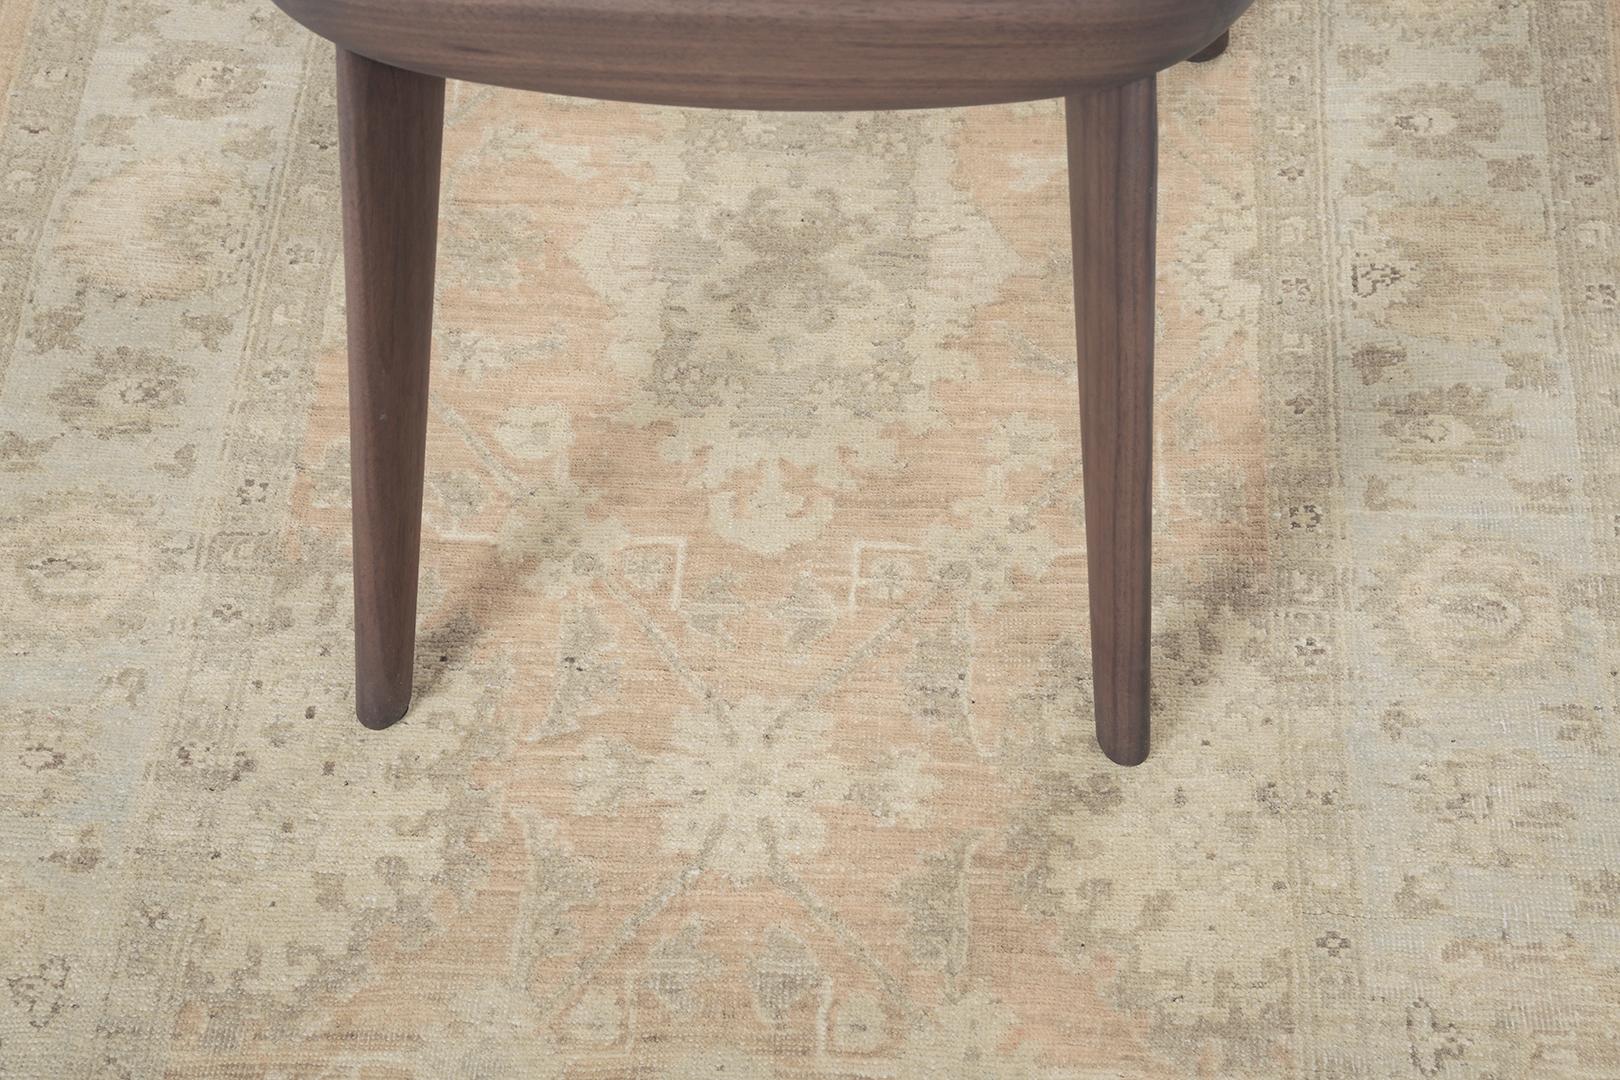 This phenomenal revival of Tabriz runner has an intricate pattern of symmetrical elegant motifs and a controlled ambiance of neutral tones with symmetrical motifs of borders. This masterwork of art utilizes comforting tones to create a warm